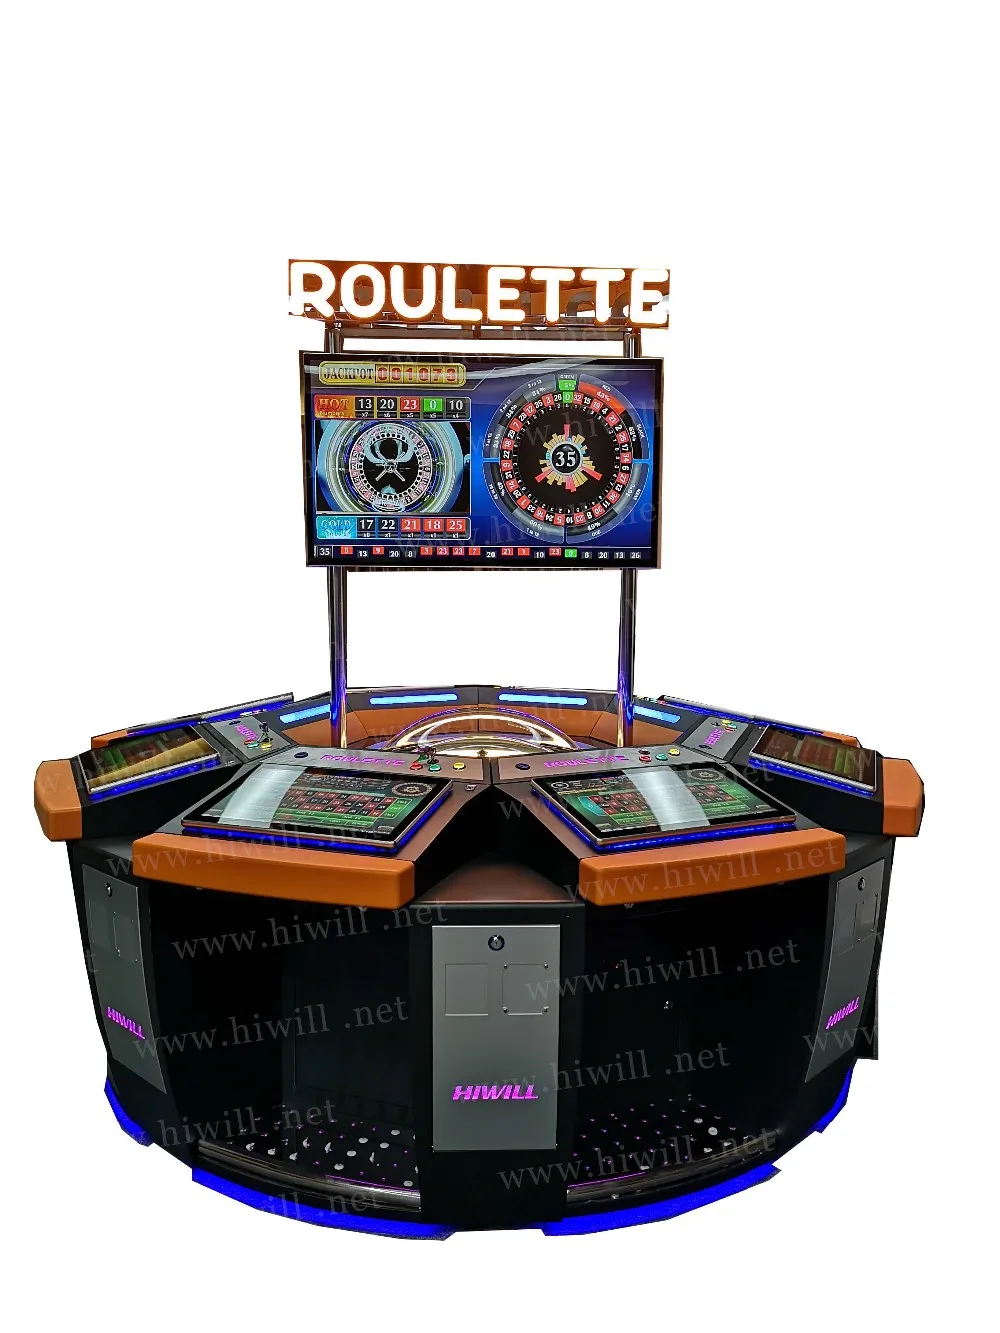 river casino chicago have electronic roulette machines